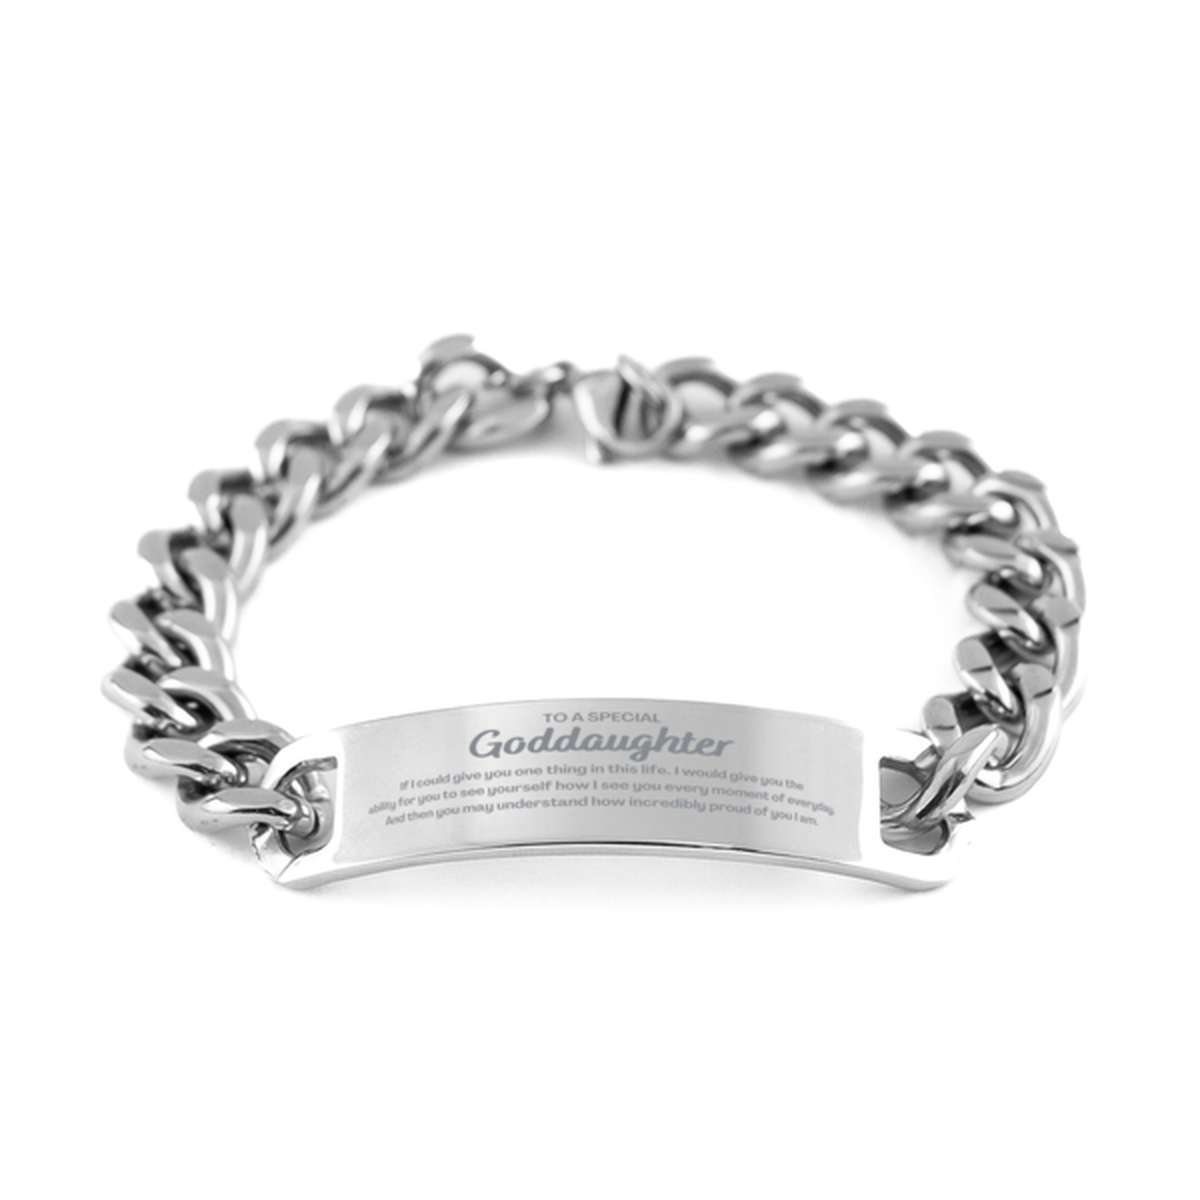 To My Goddaughter Cuban Chain Stainless Steel Bracelet, Gifts For Goddaughter Engraved, Inspirational Gifts for Christmas Birthday, Epic Gifts for Goddaughter To A Special Goddaughter how incredibly proud of you I am